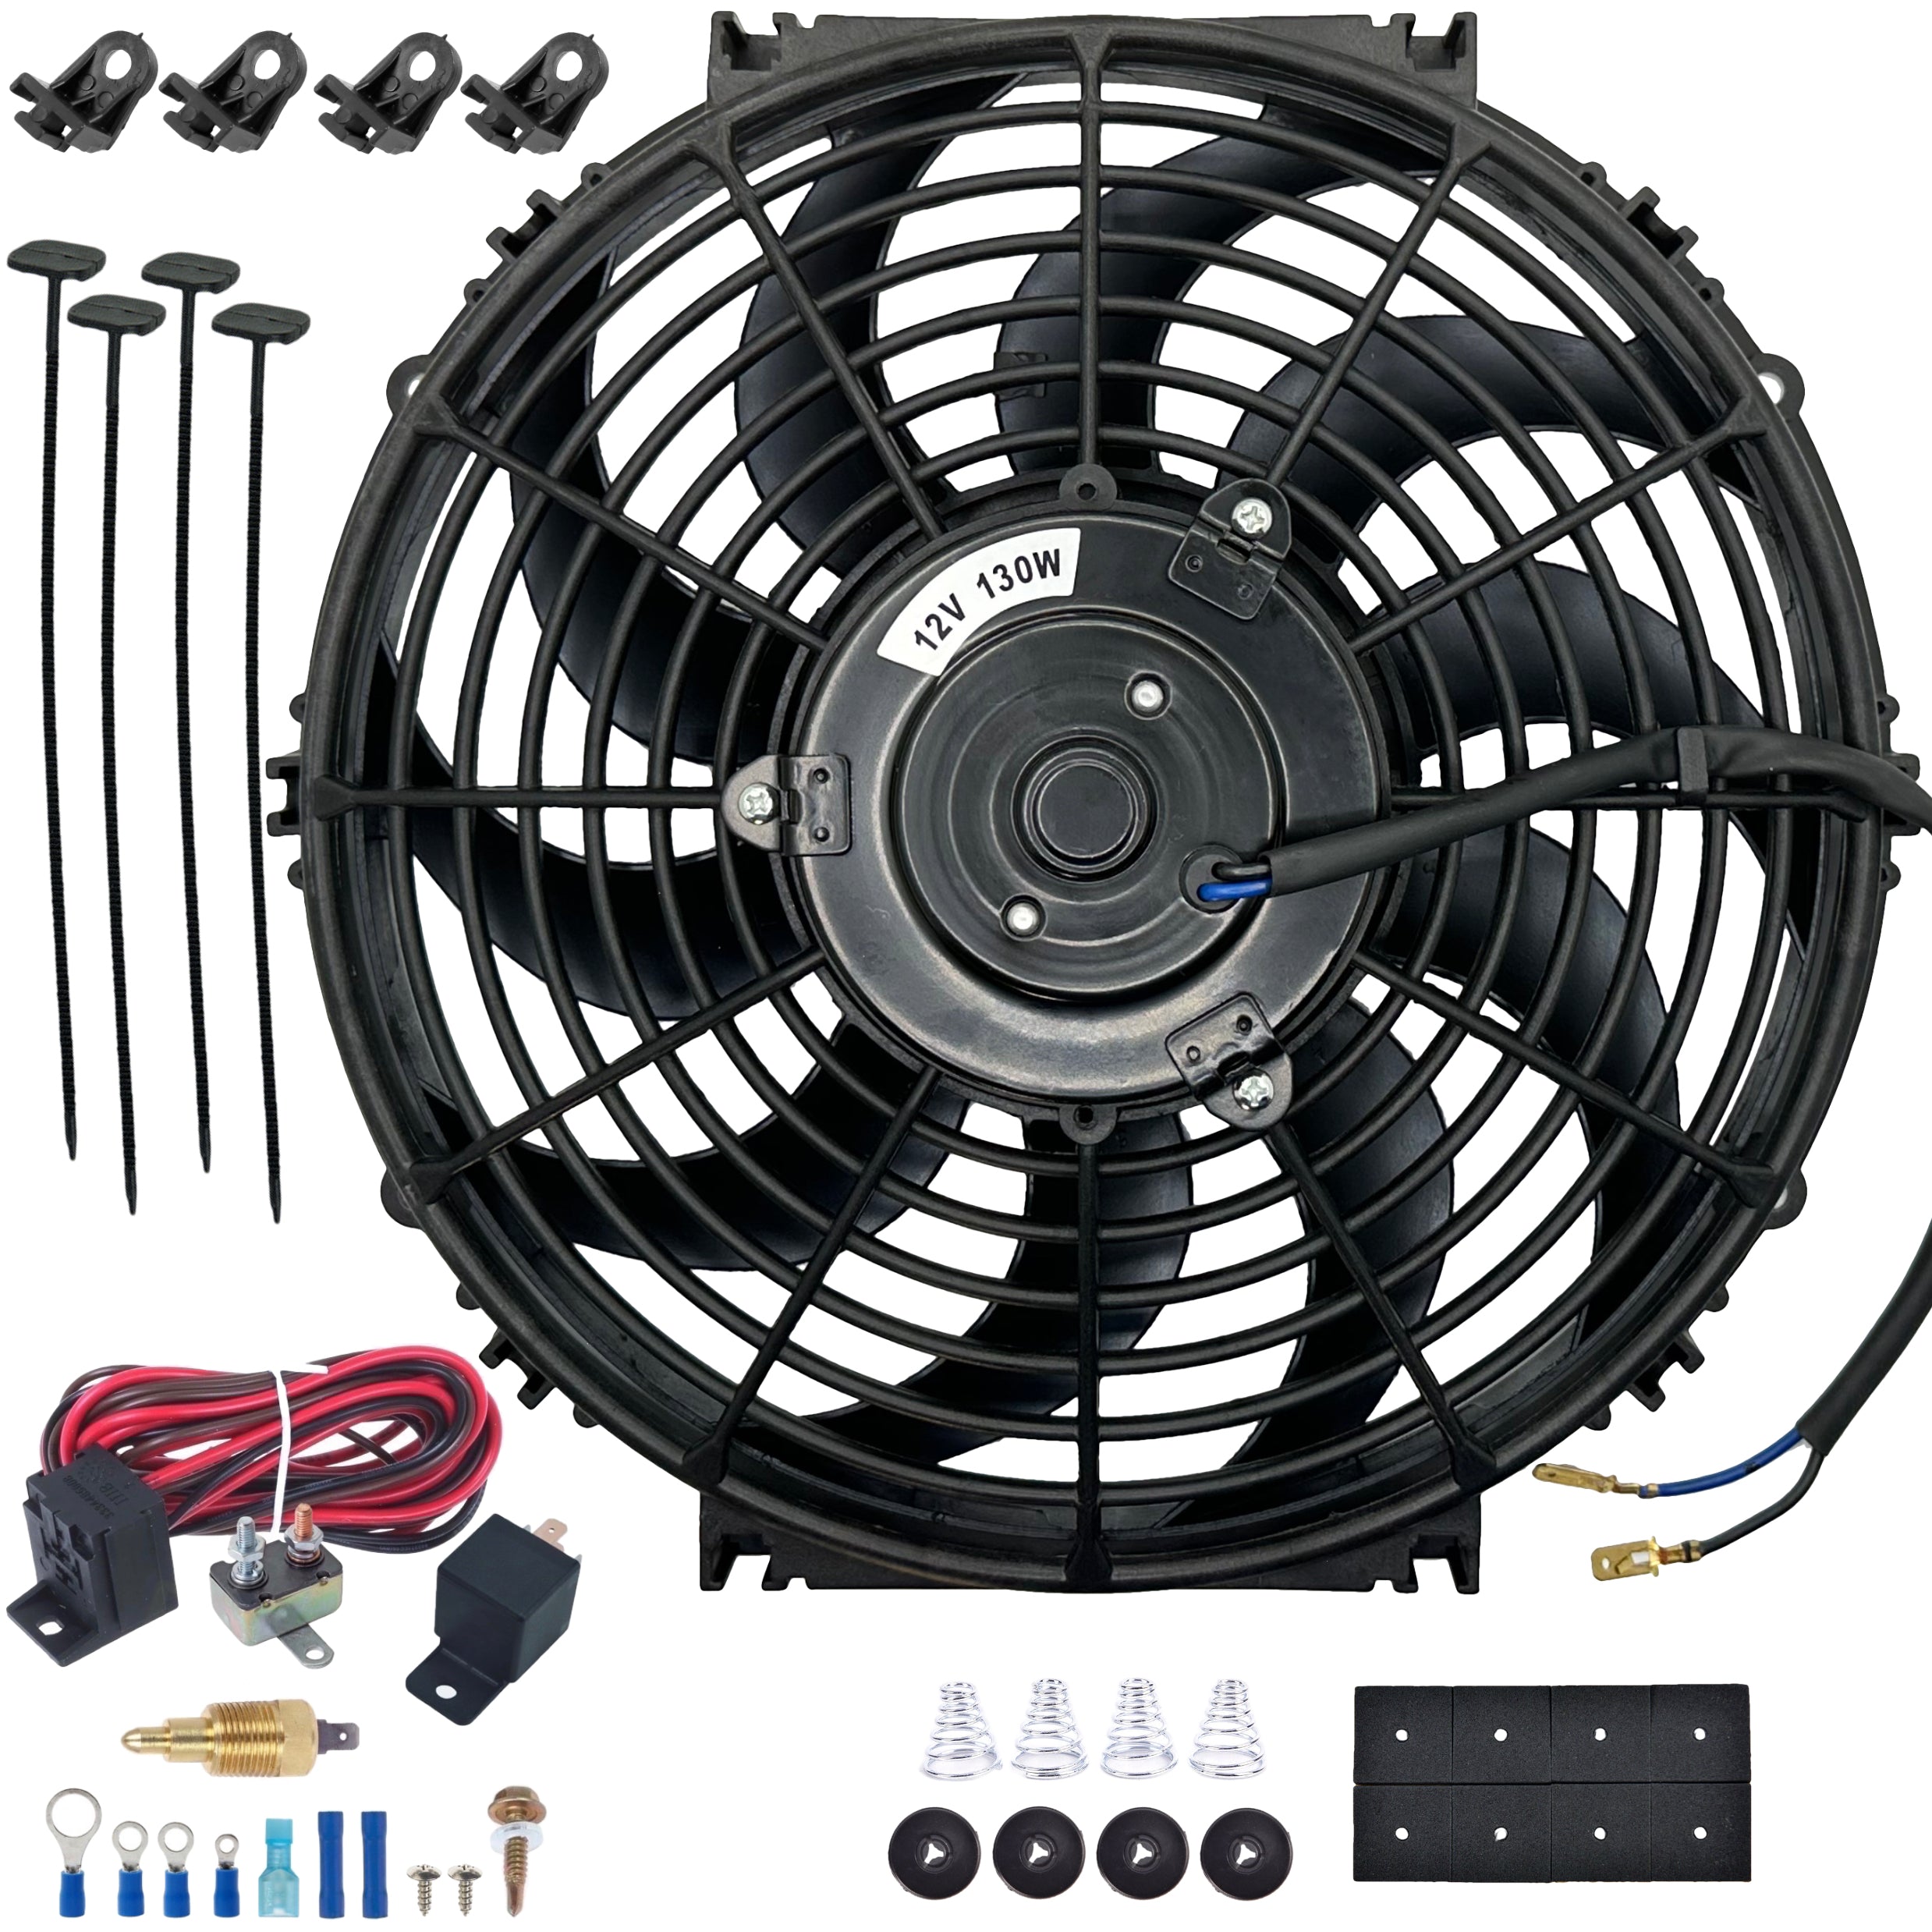 12-13 Inch 130w Performance Motor 12 Volt Electric Radiator Cooling Fa –  American Volt